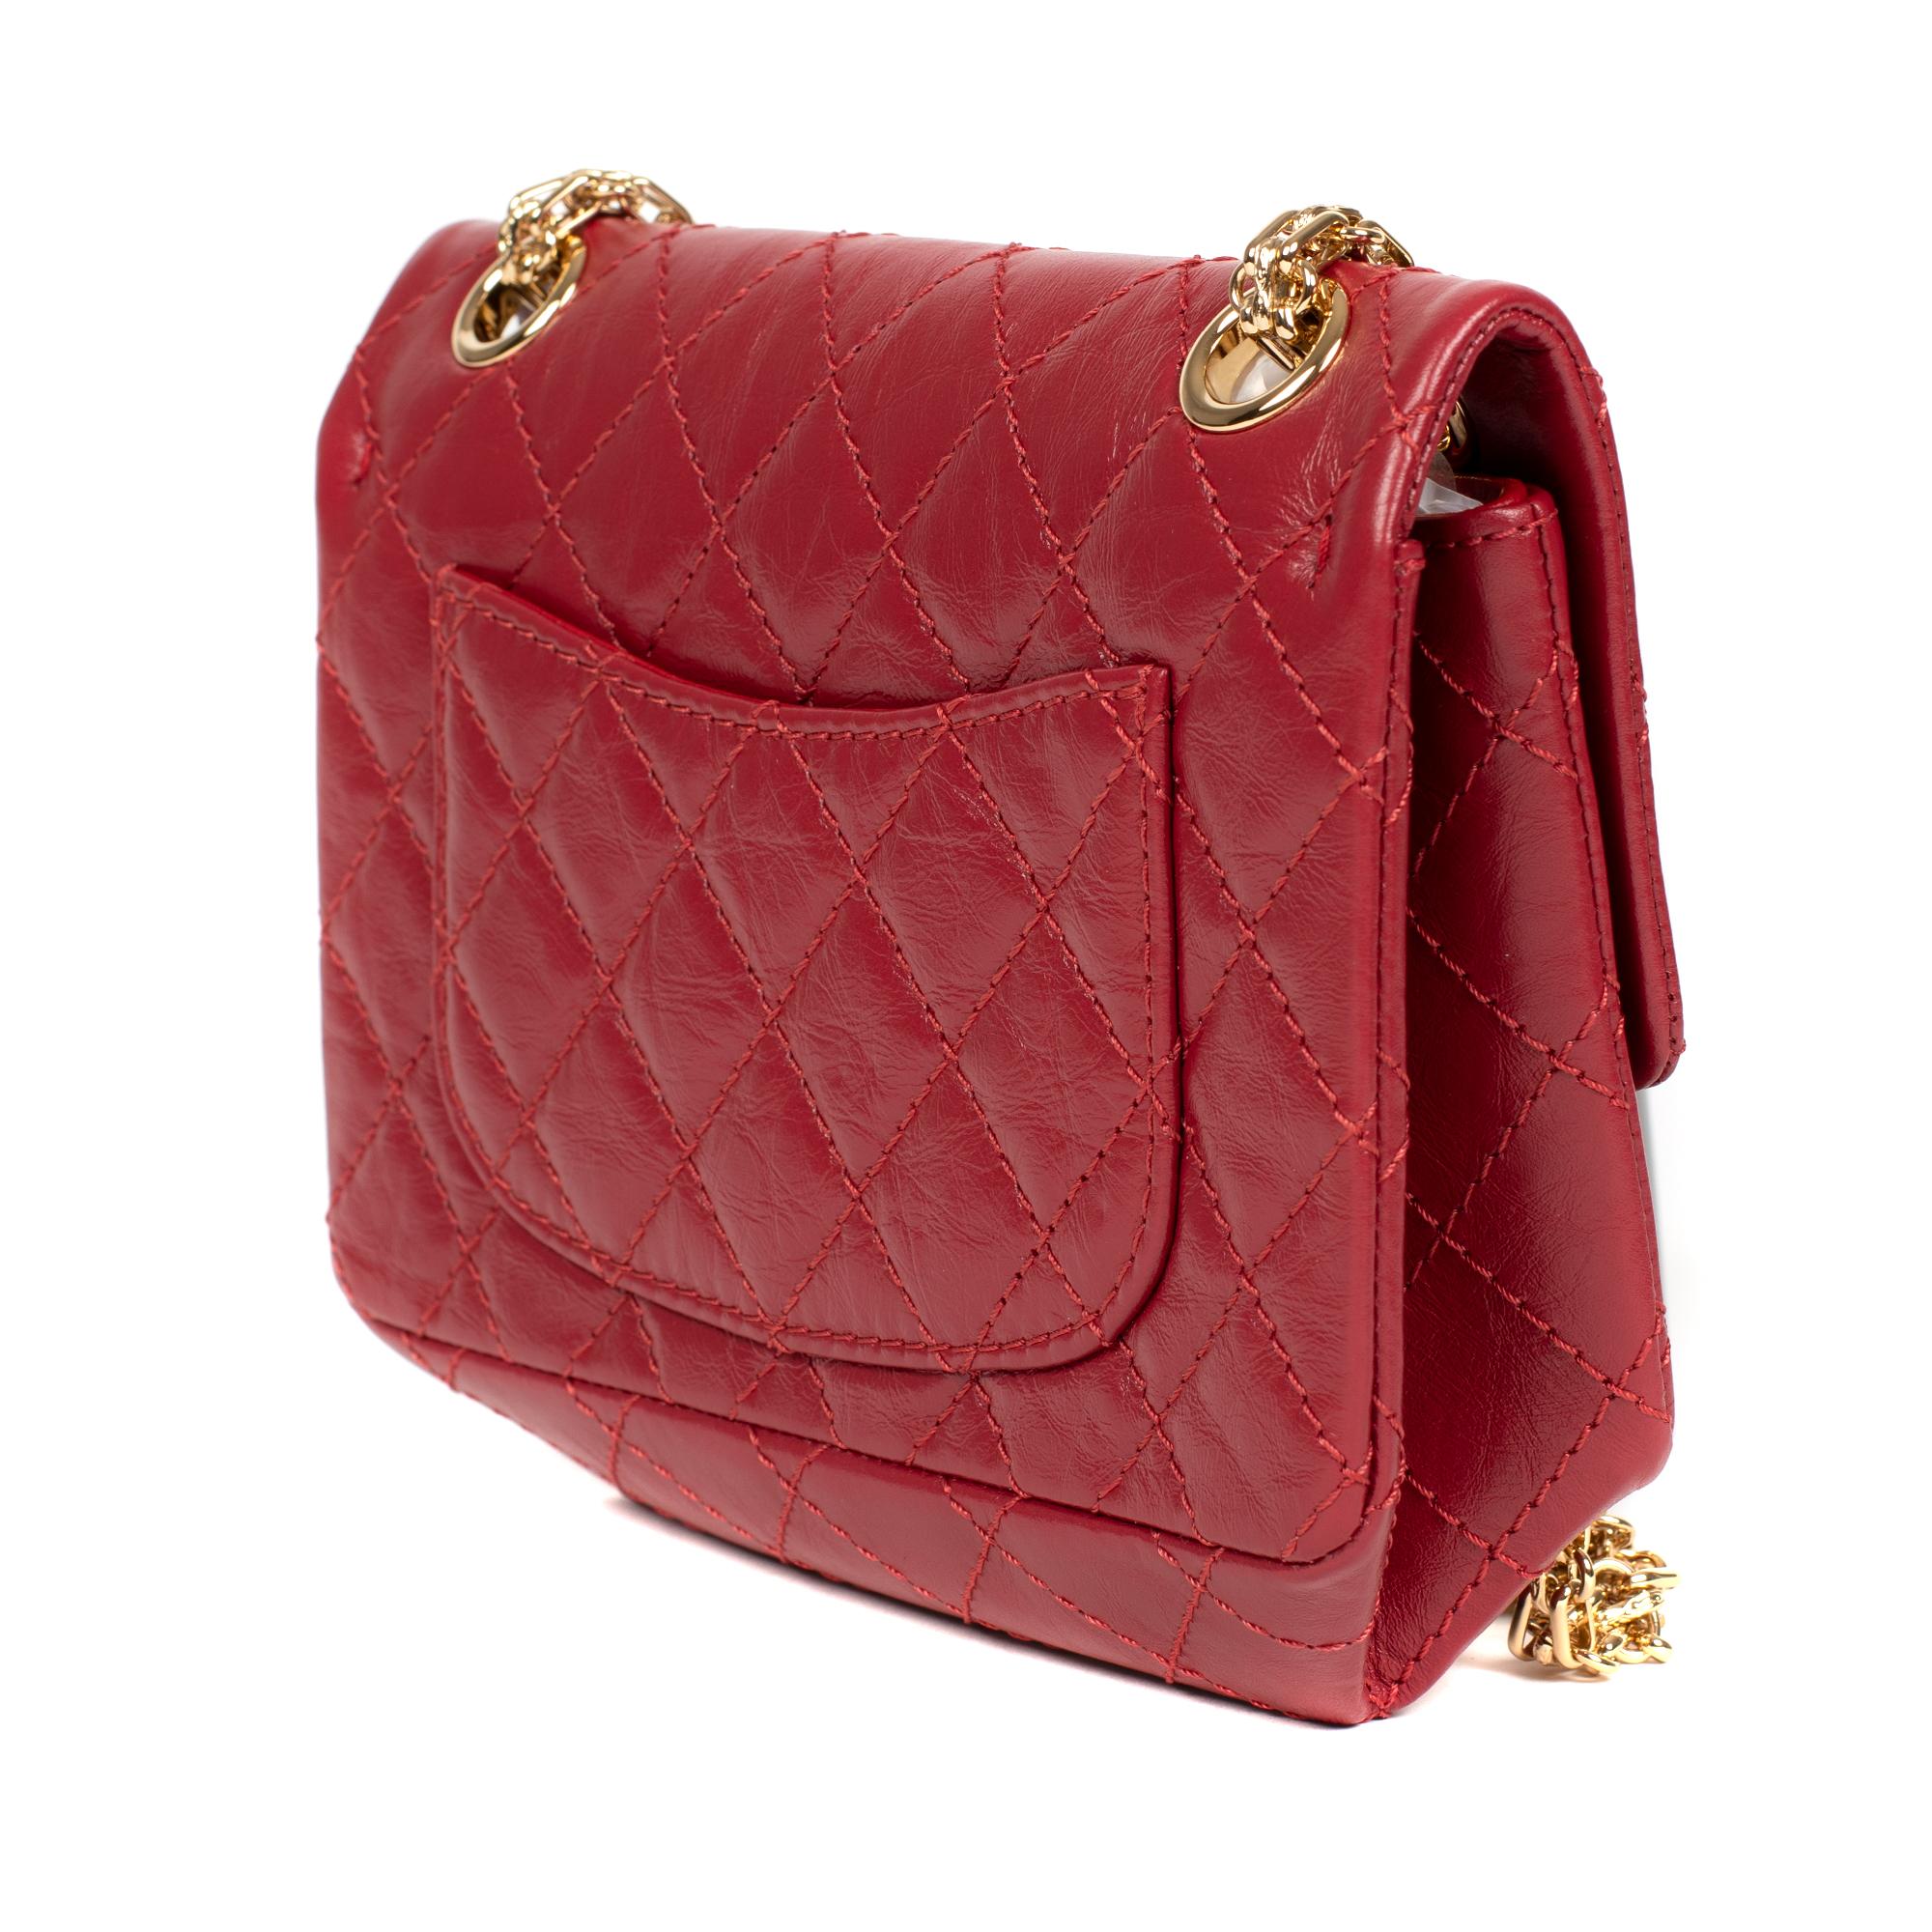 Rare Mini Chanel 2.55 Reissue handbag in red quilted leather, gold hardware 1